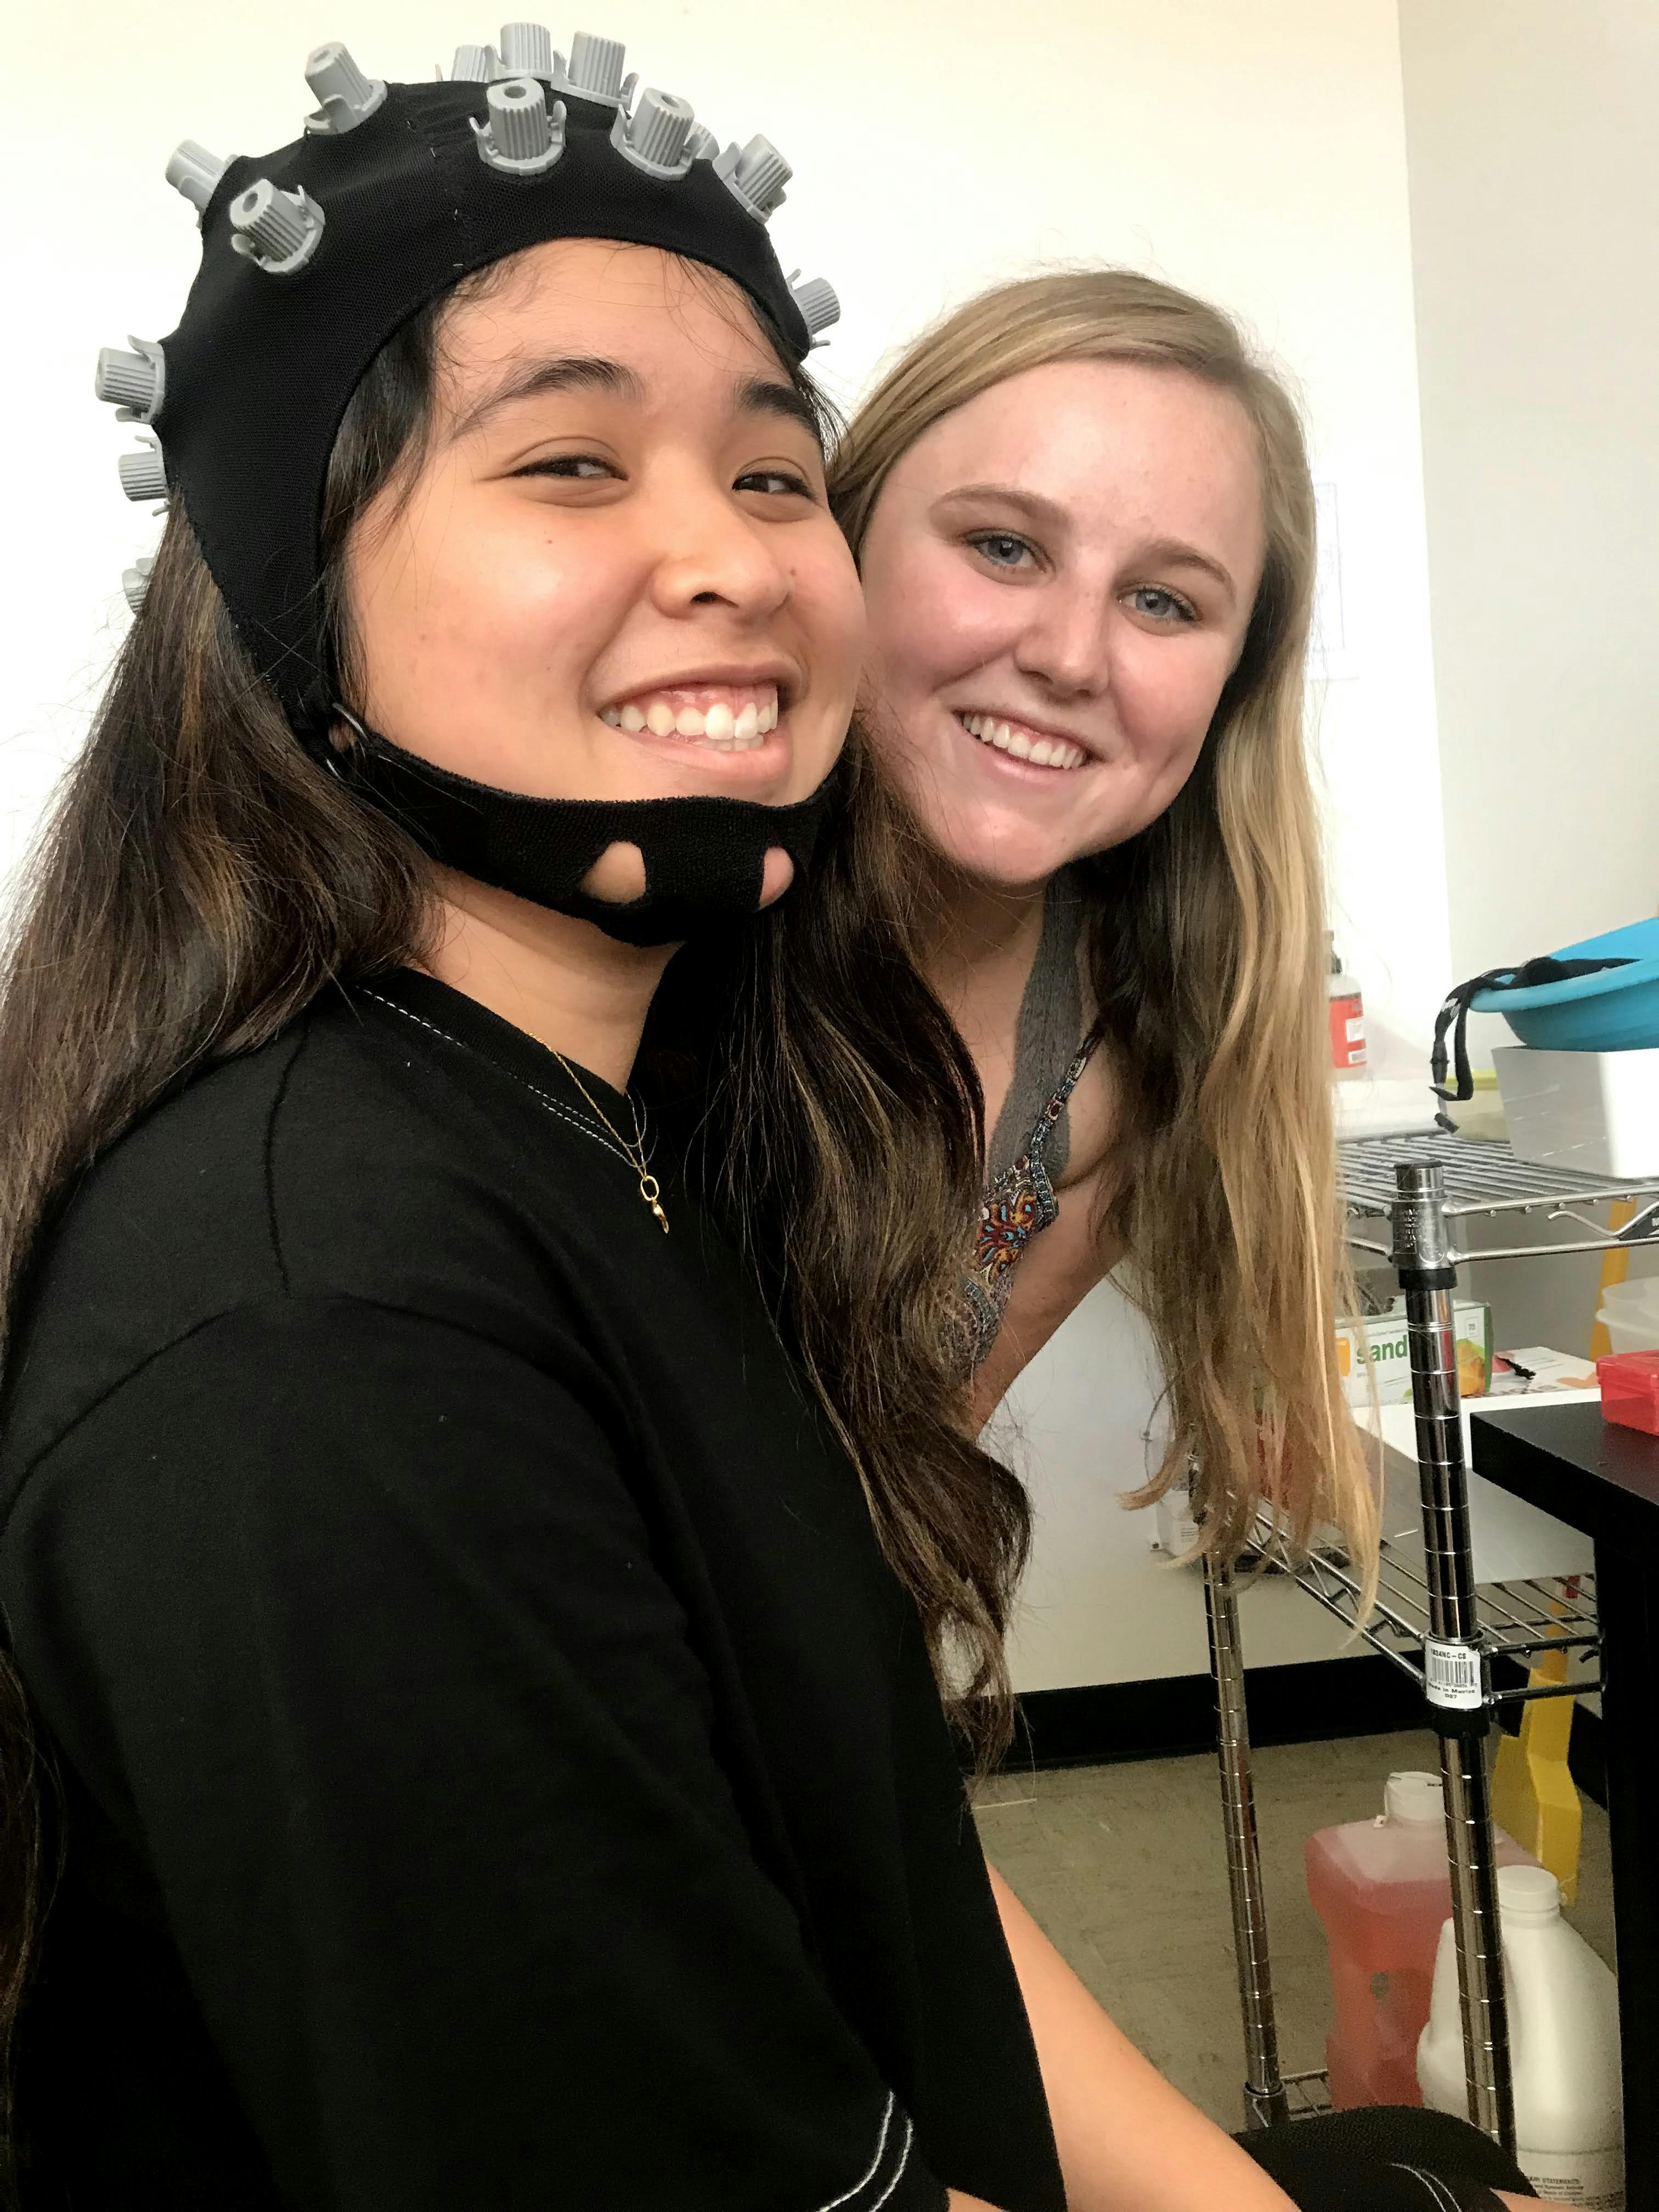 Former UCLA undergrads Annika Daug ('20, B.S., Psychobiology) and Riley Fox ('21, B.A., Psychology) took part in a study on student attention, led by UCLA Associate Professor of Education Jennie Grammer. Courtesy of Jennie Grammer